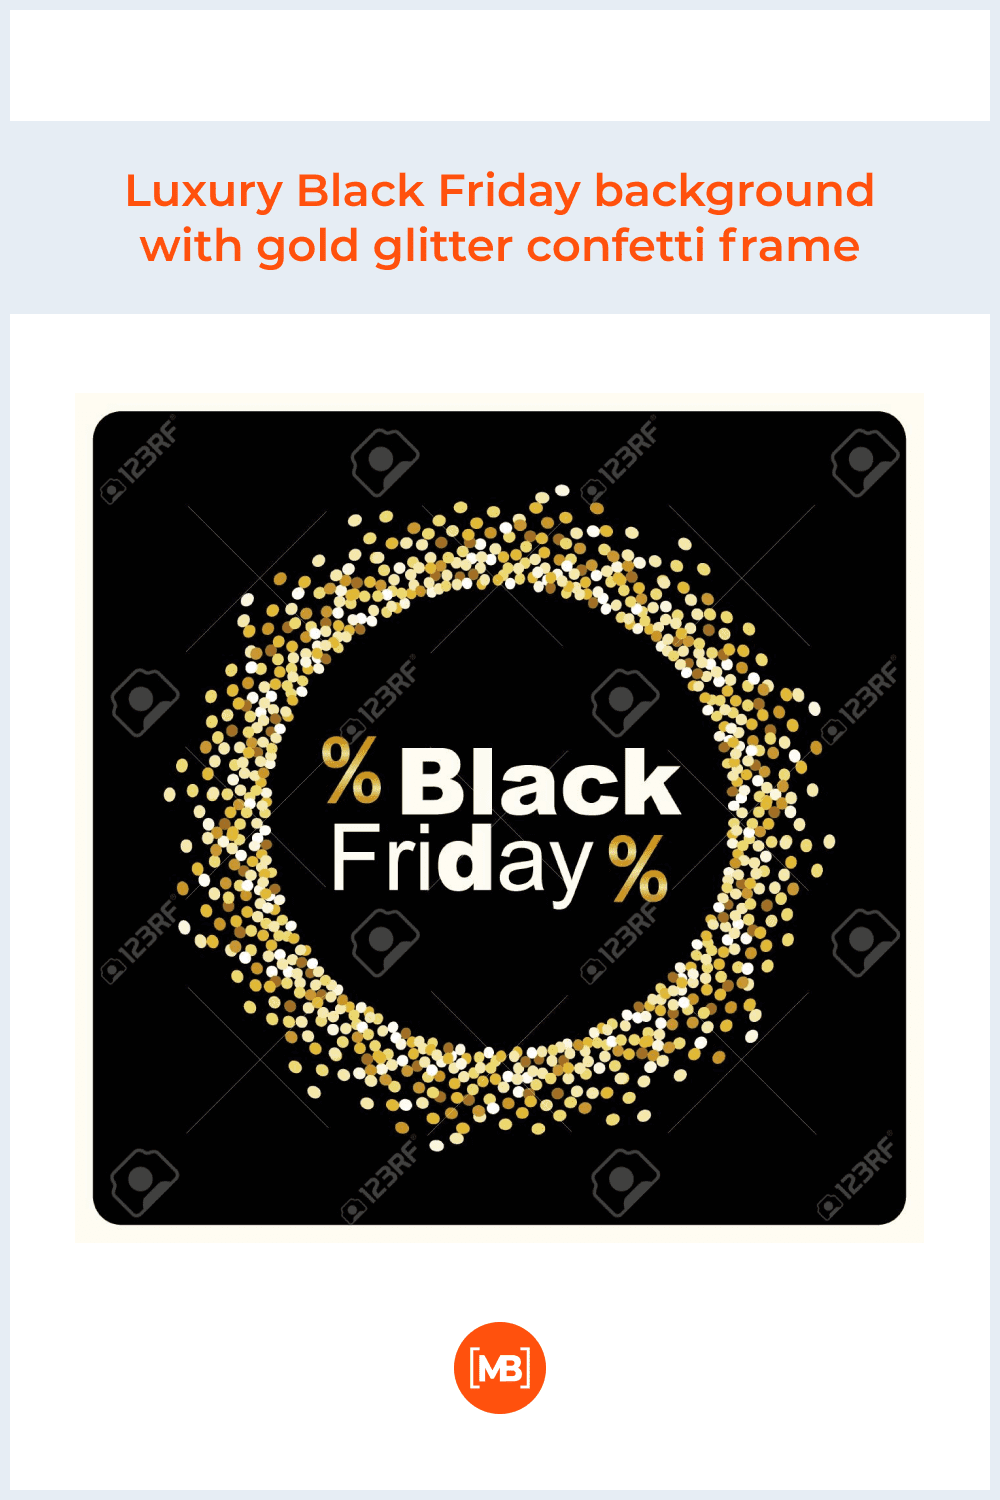 Black Friday Banner with Gold Glitter Confetti Frame.